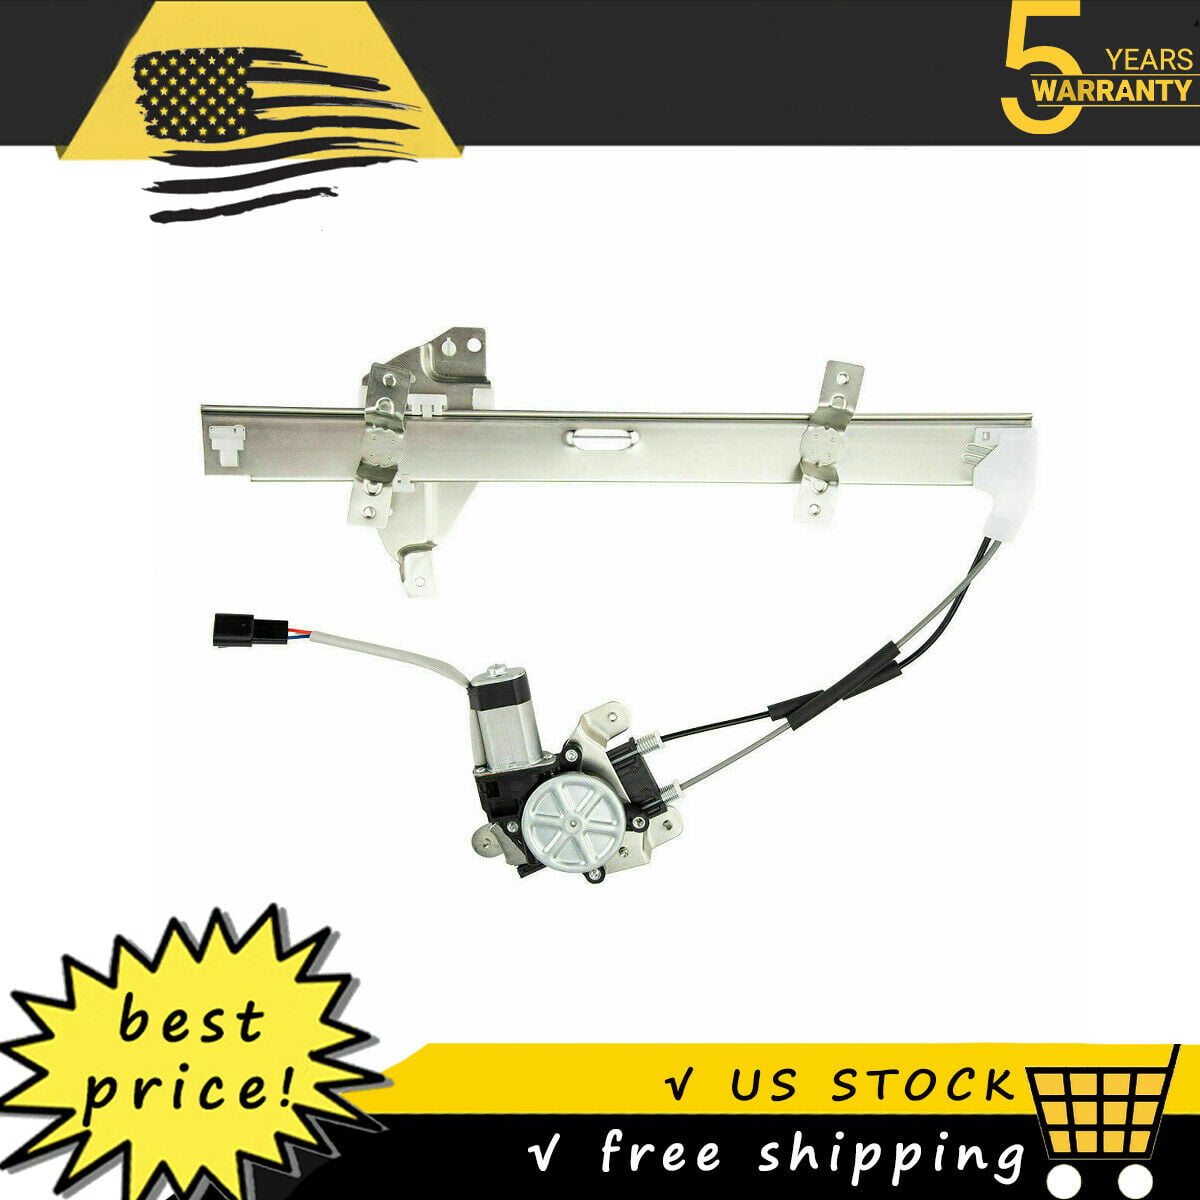 FFFauto 741-637 Window Regulator with Front Left Driver Side Fit for GM Buick Century 1997-2005 GM Buick Regal 1997-2004 GM Oldsmobile Intrigue 1998-2002 OEM:10315144 10334397 